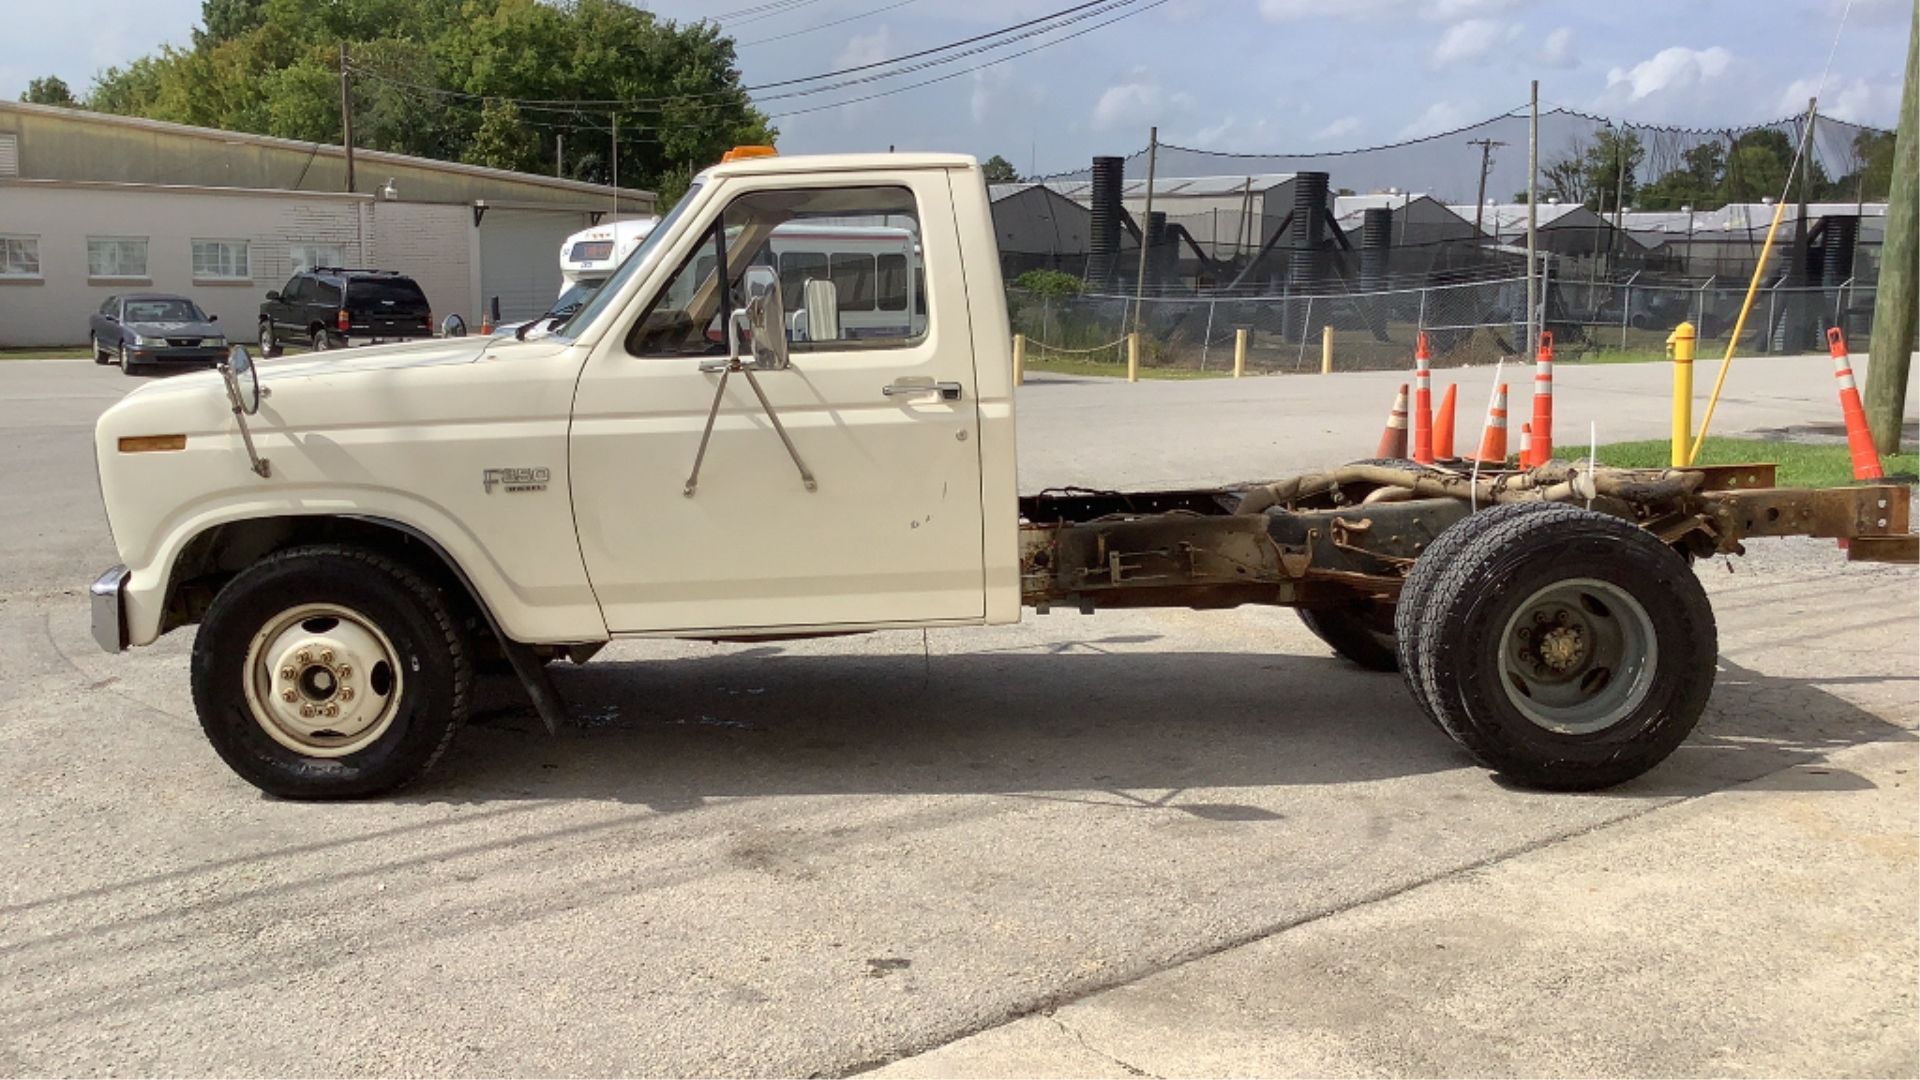 1985 Ford F-350 Regular Cab Chassis Truck 2WD - Image 13 of 83